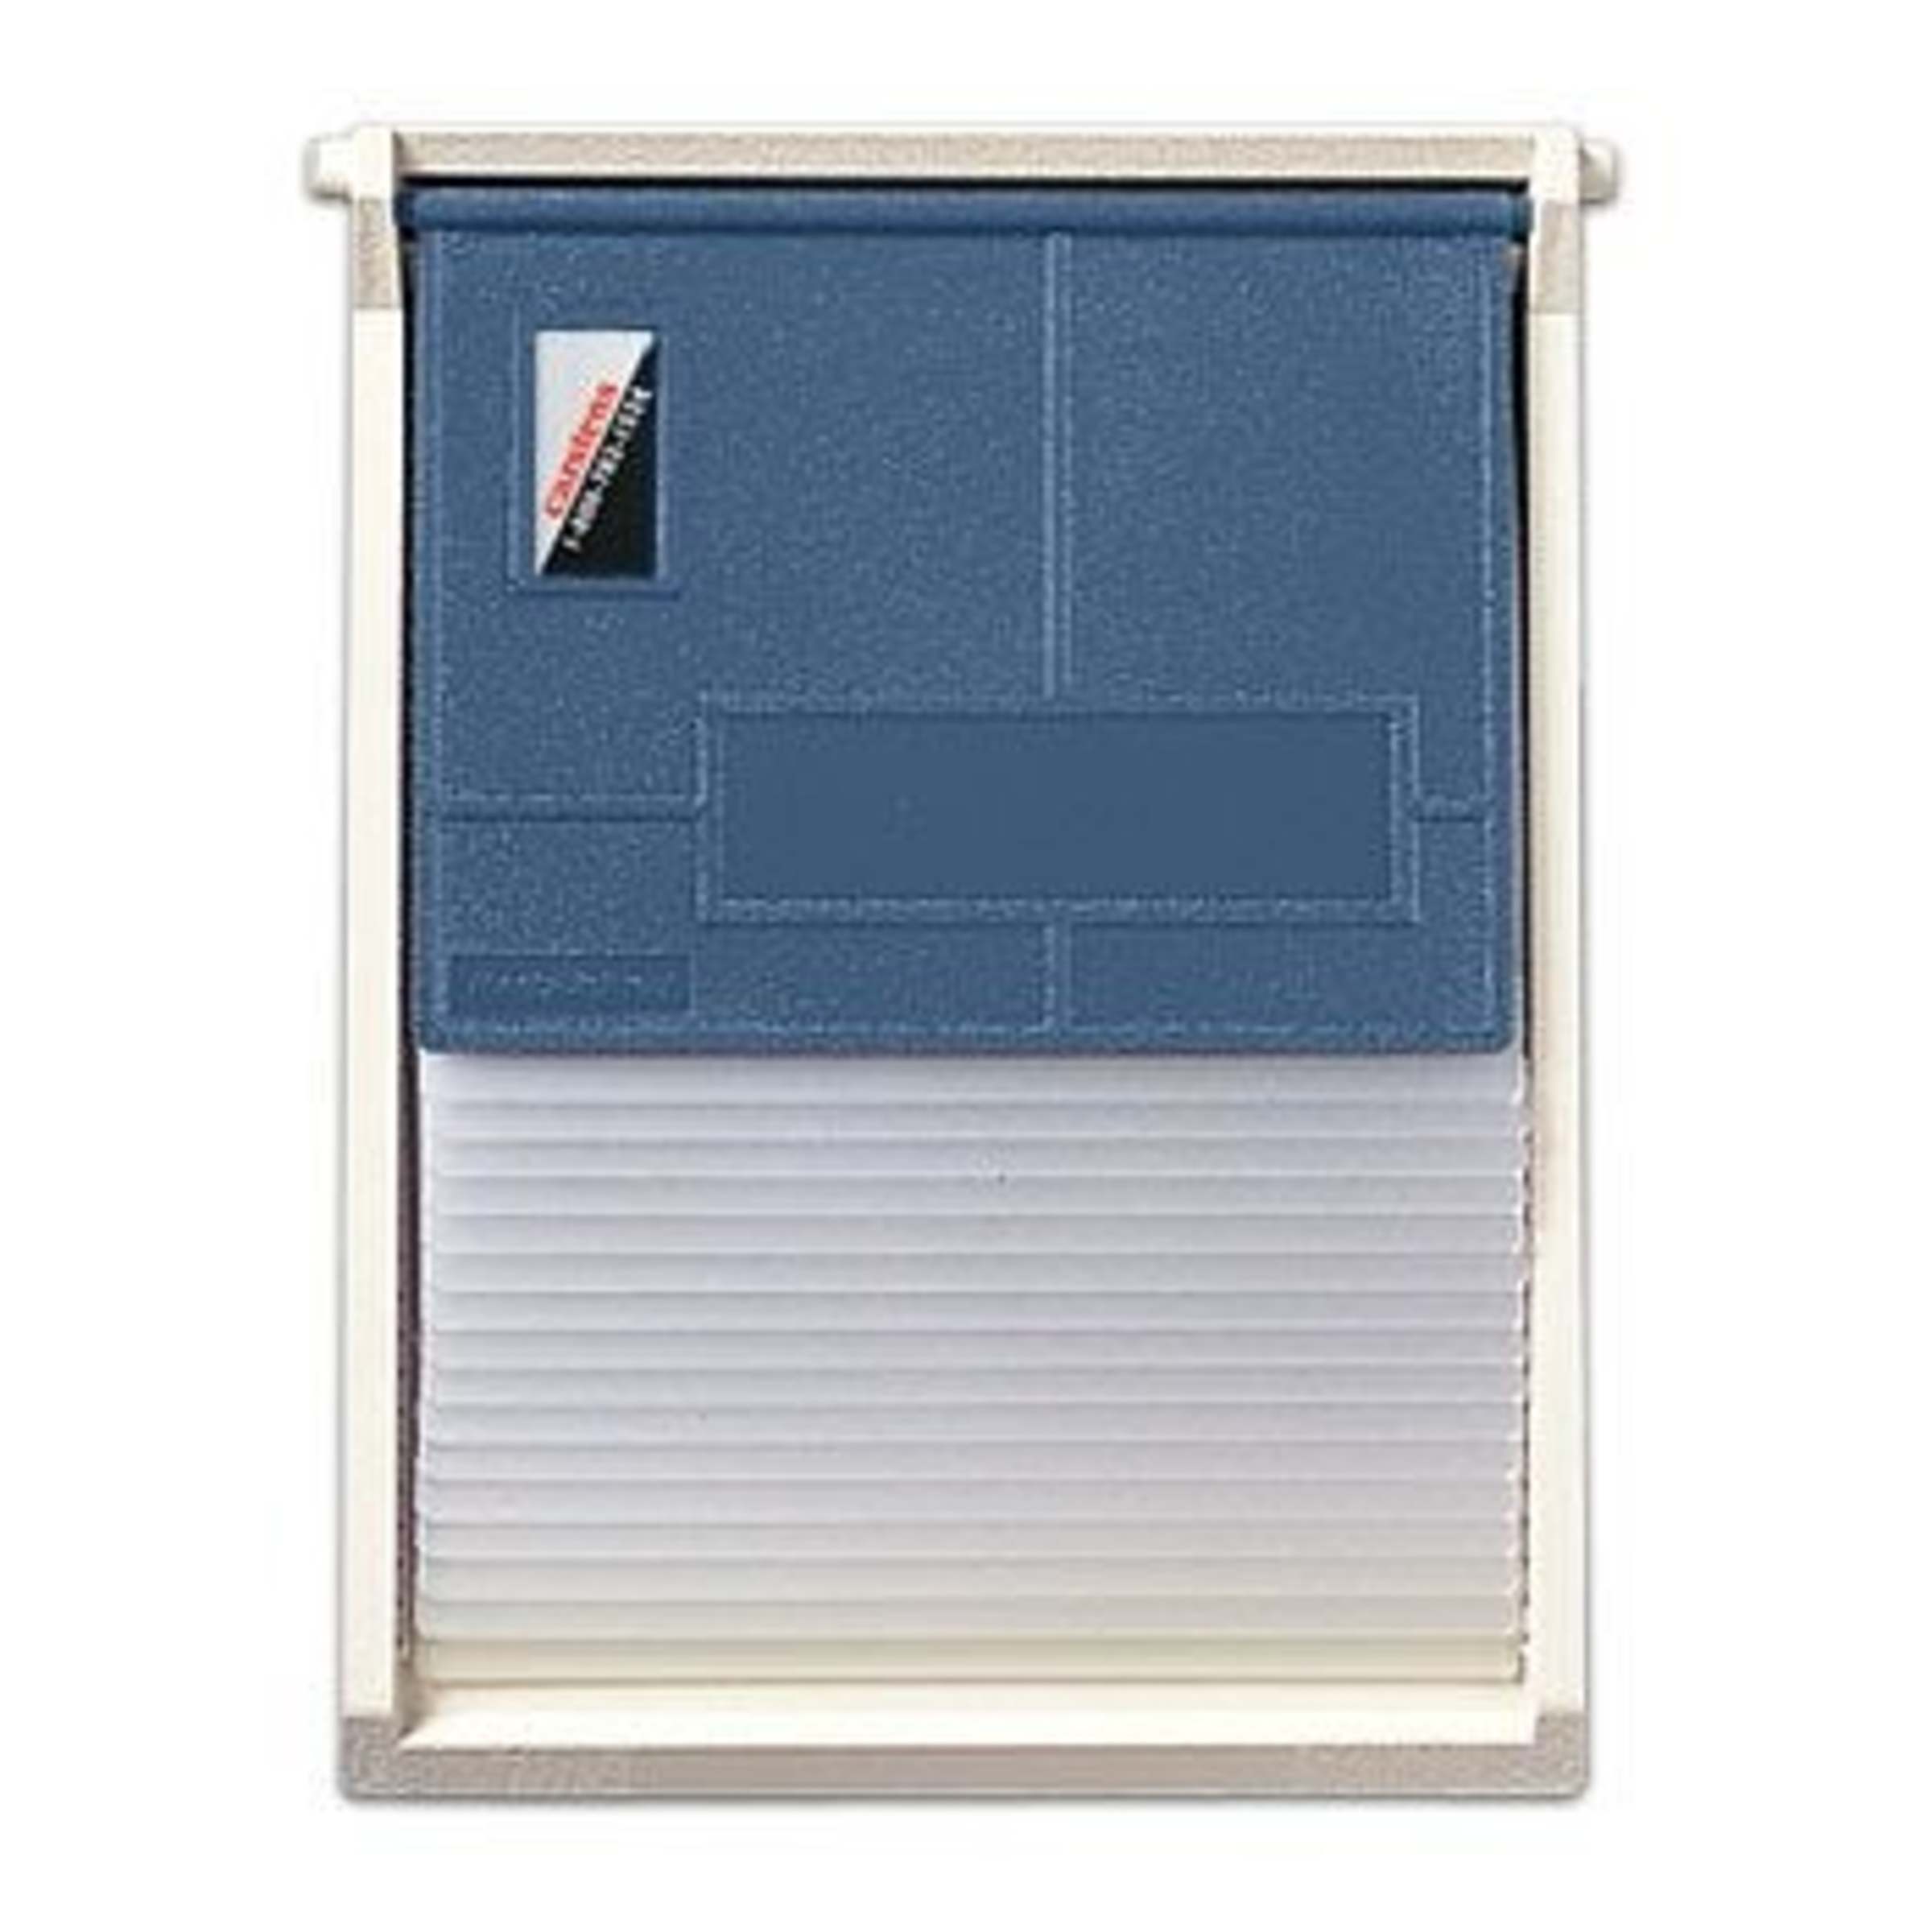 Kardex Visitray Document Filing System for 8.5" x 6" Sheets